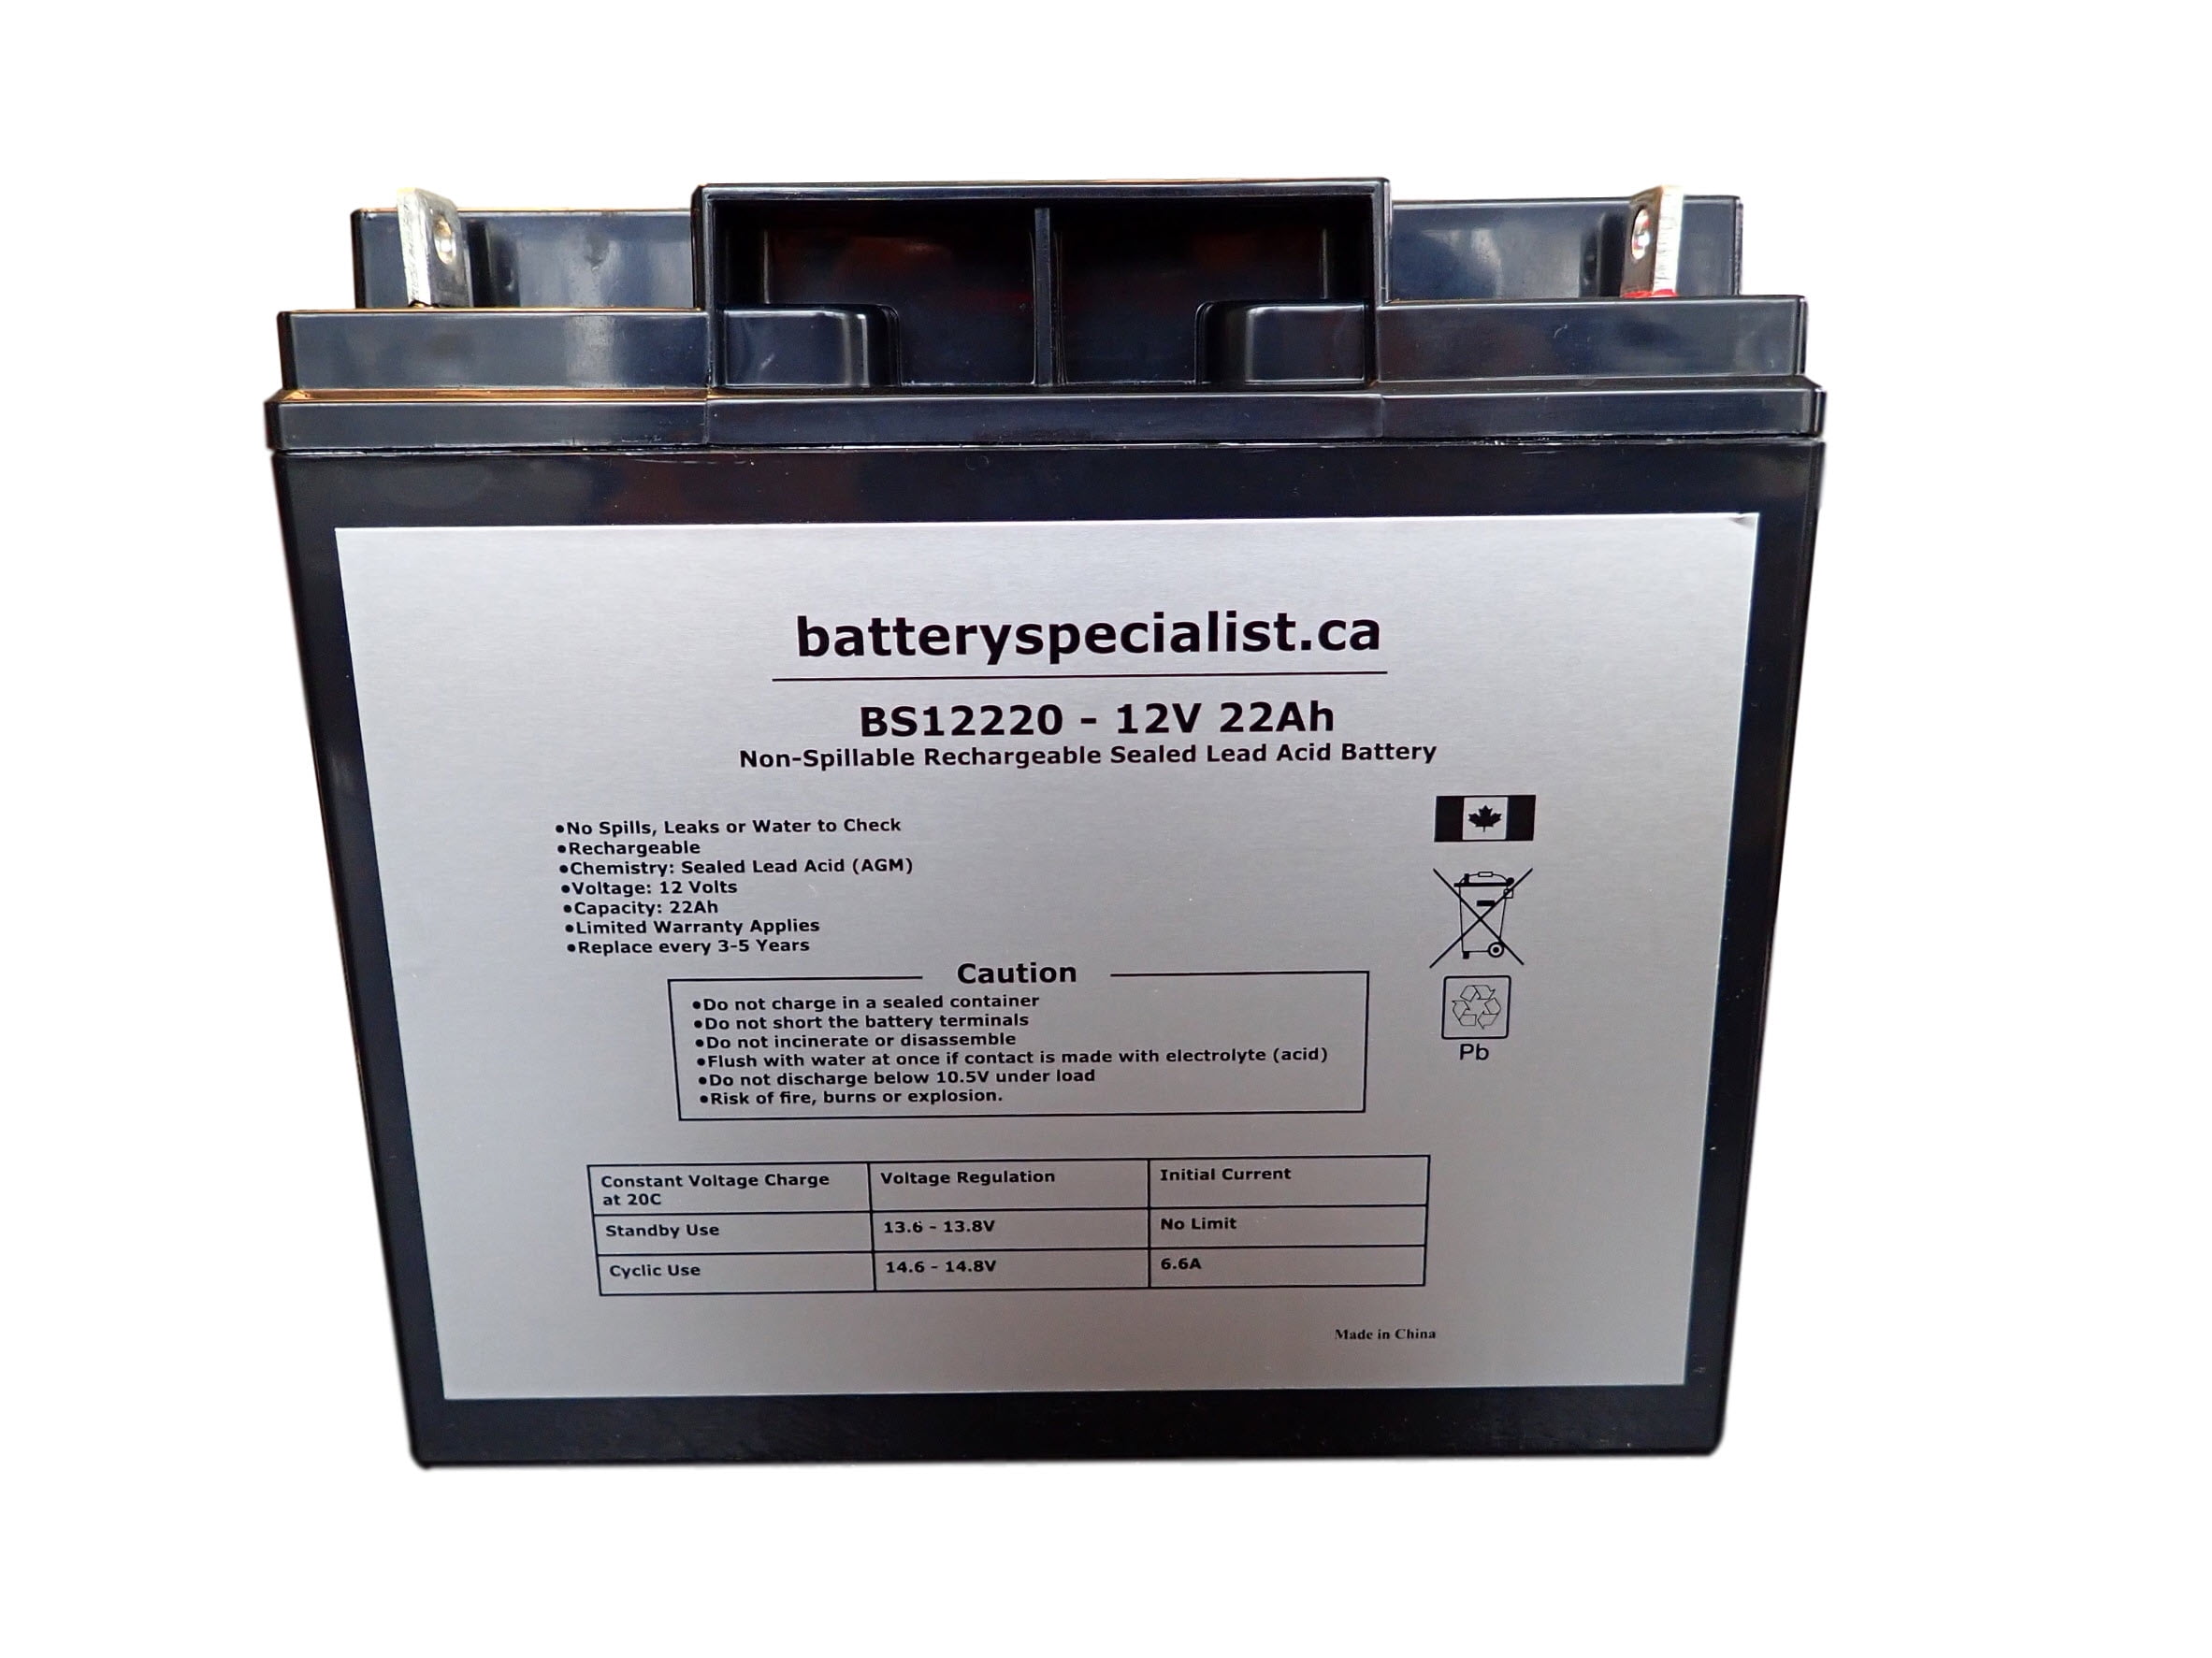 This is an AJC Brand Replacement Portalac PE12V17 12V 22Ah UPS Battery